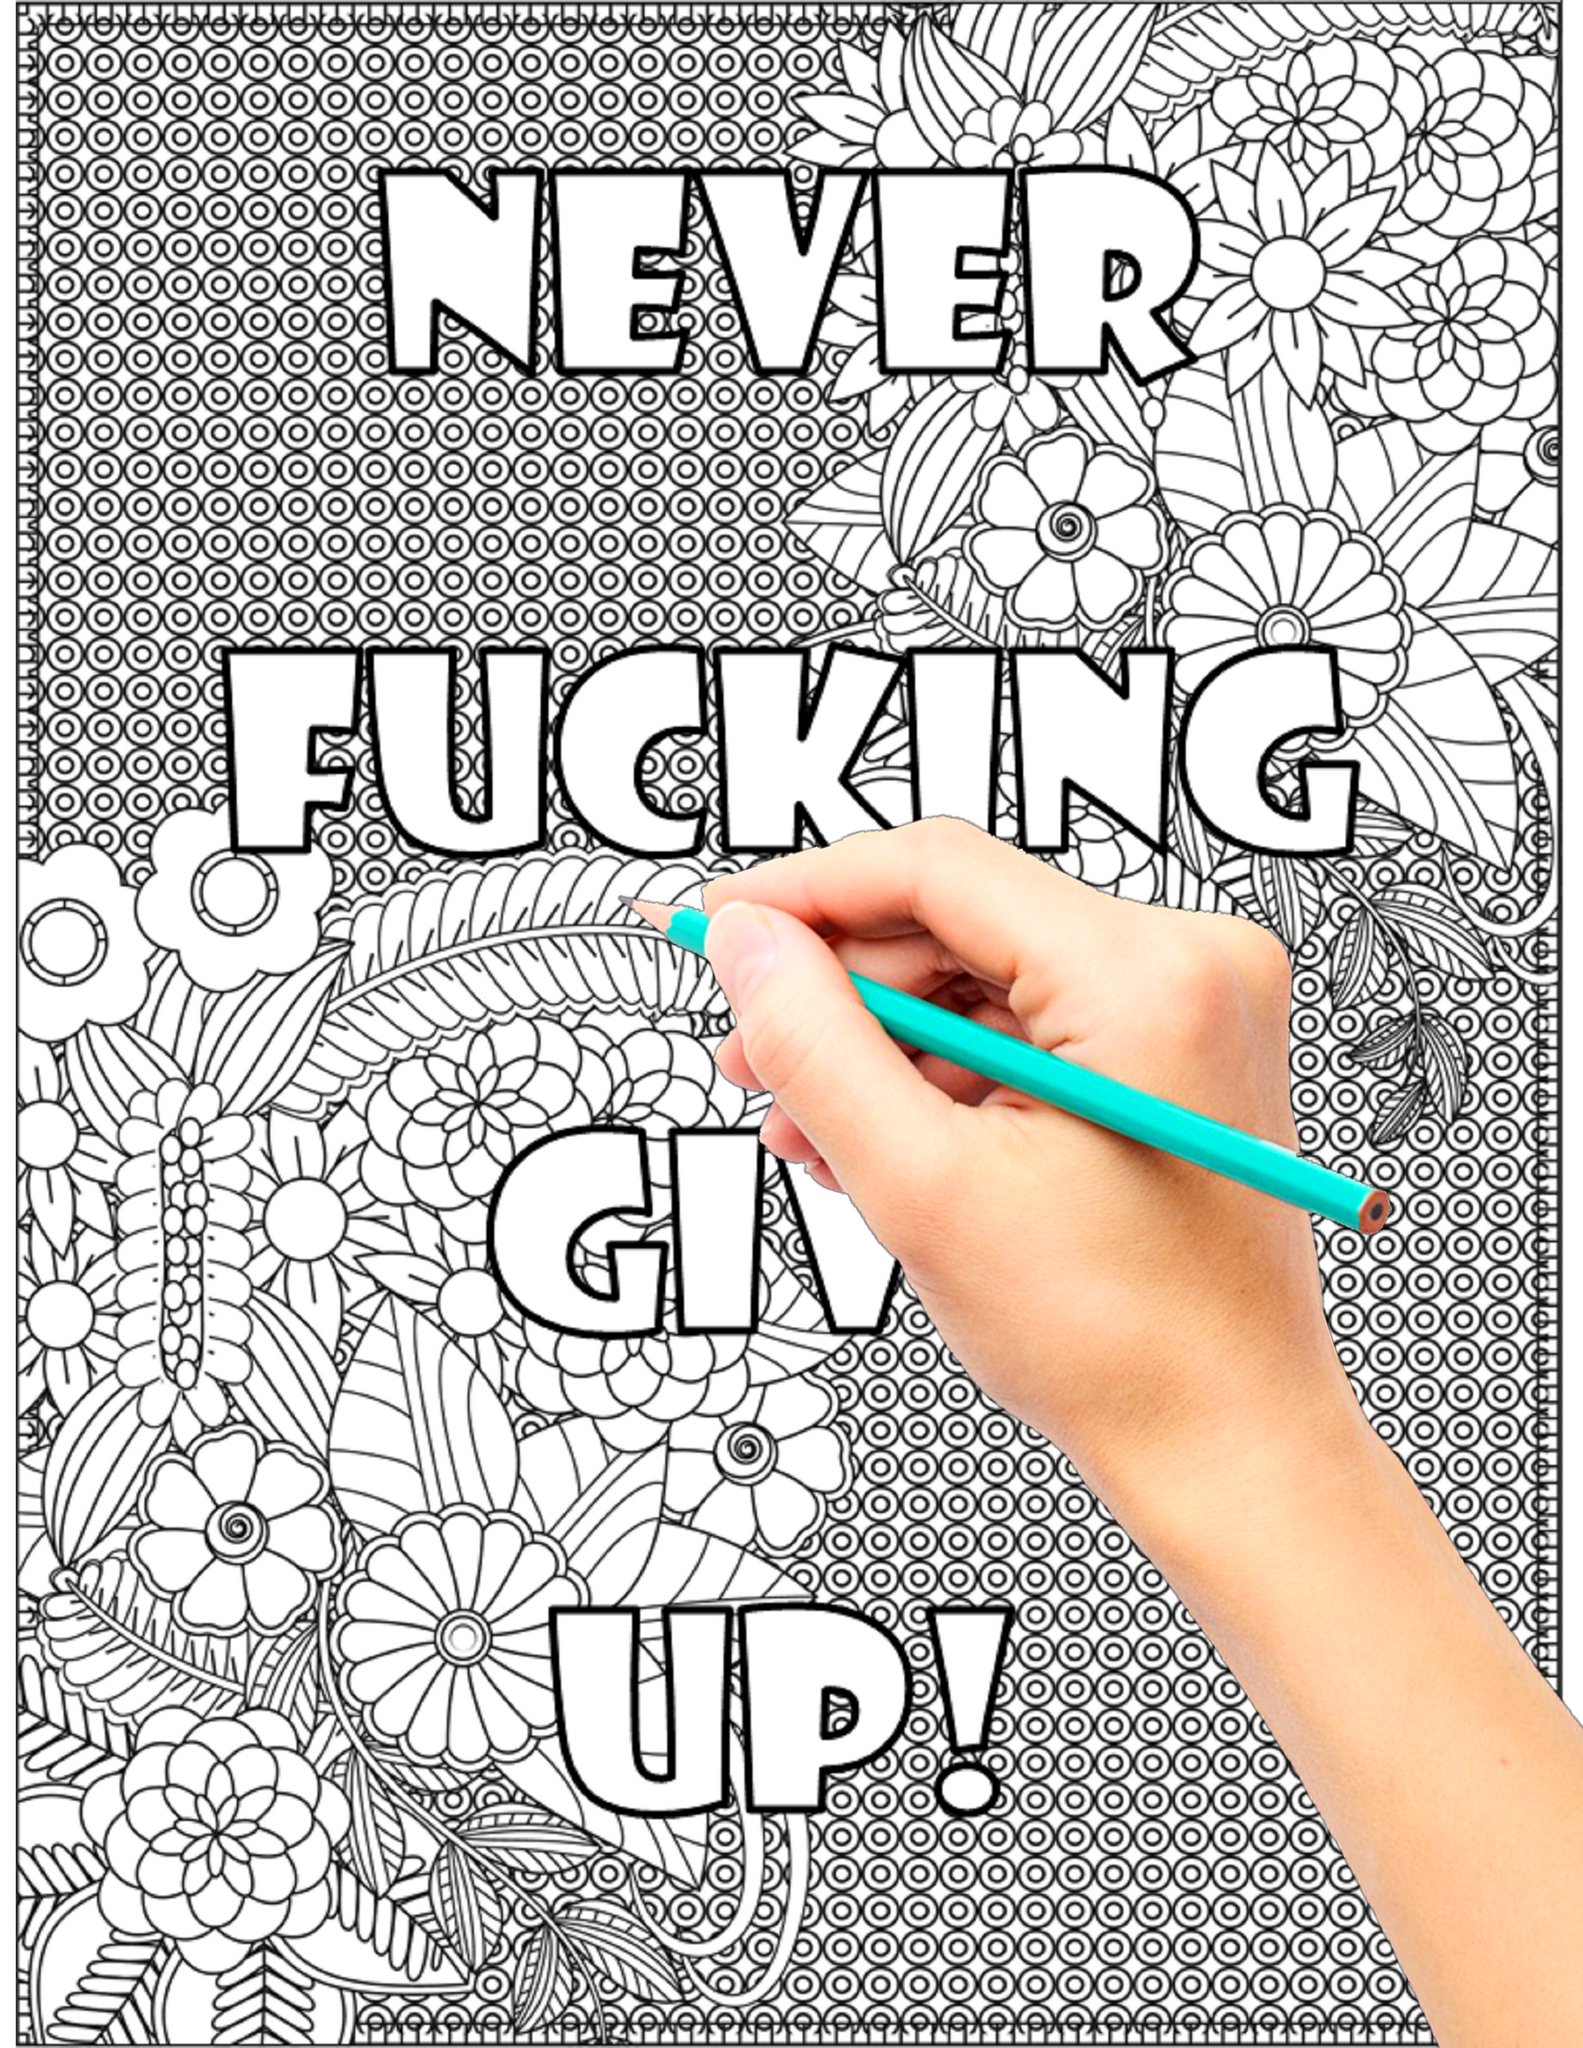 cursing coloring book for adults only: adult swear word coloring book and  pencils, cursing coloring book for adults, cussing coloring books, cursing  coloring book, adult swear word coloring book and p 